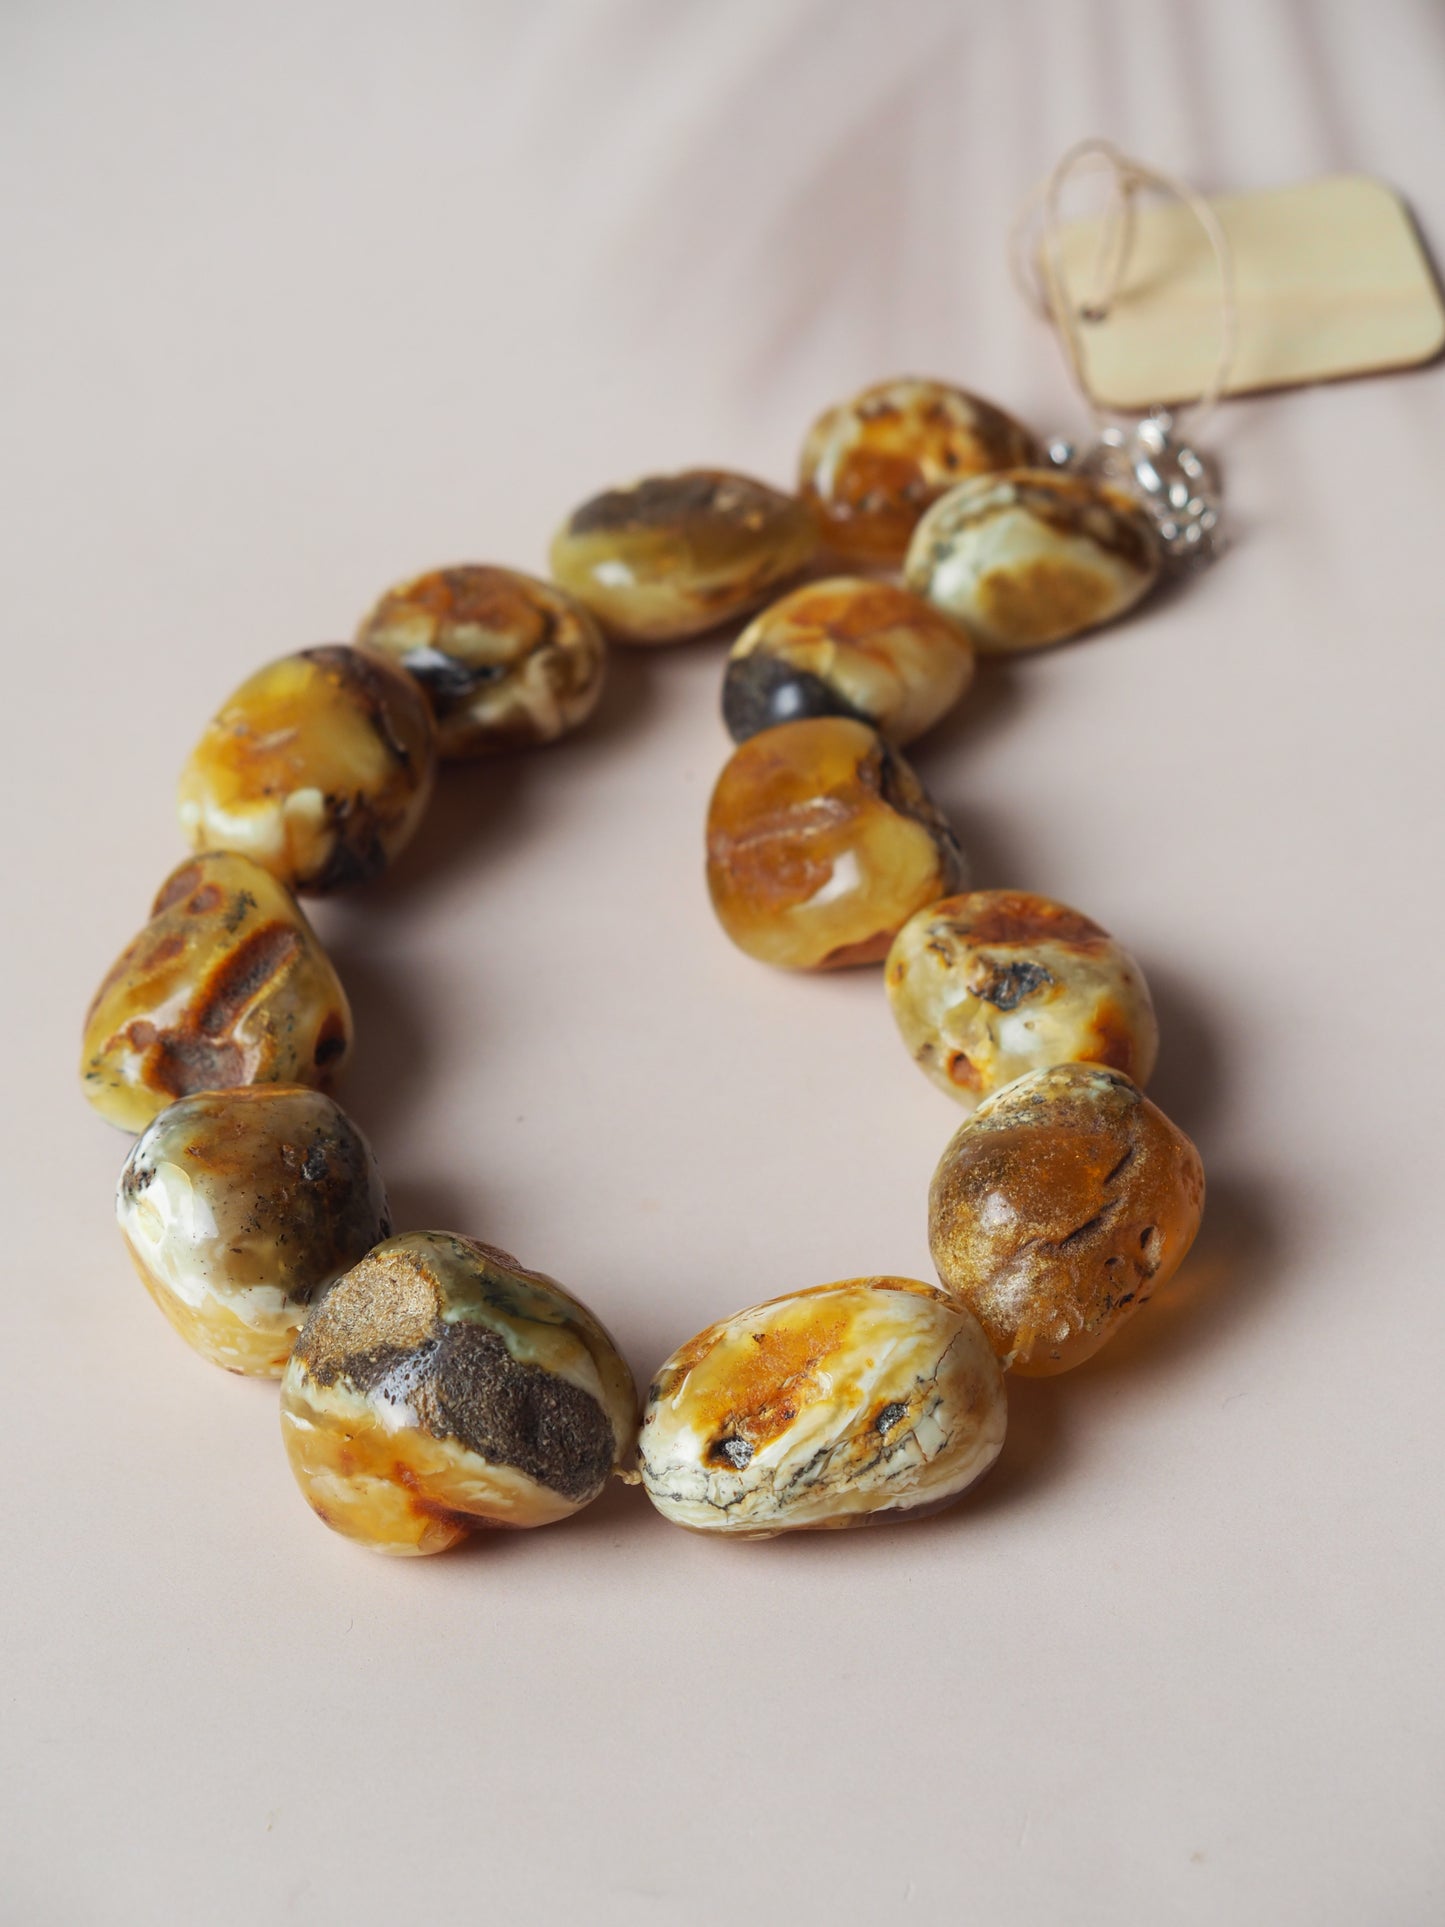 Huge and Unique Raw Amber Necklace from Private Collector from Poland 1970s with Certificate